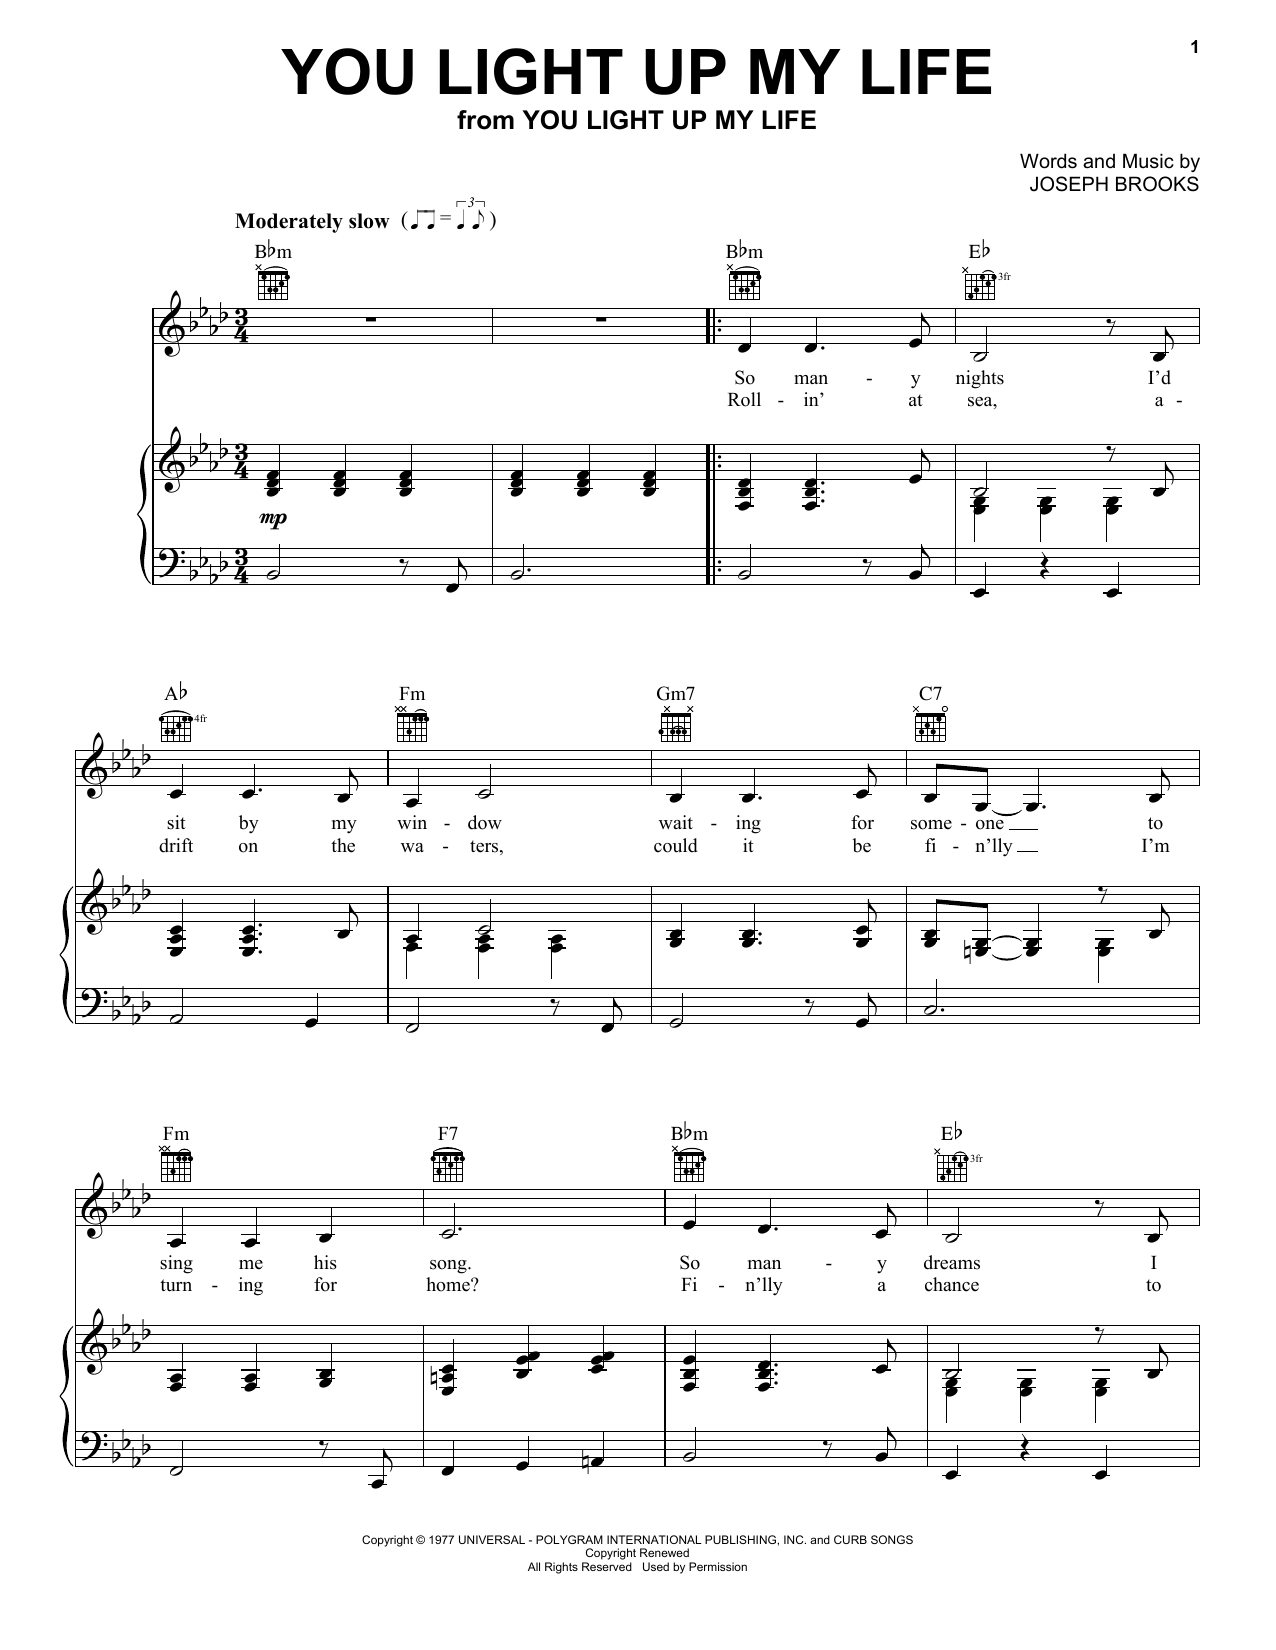 Debby Boone You Light Up My Life sheet music notes and chords. Download Printable PDF.